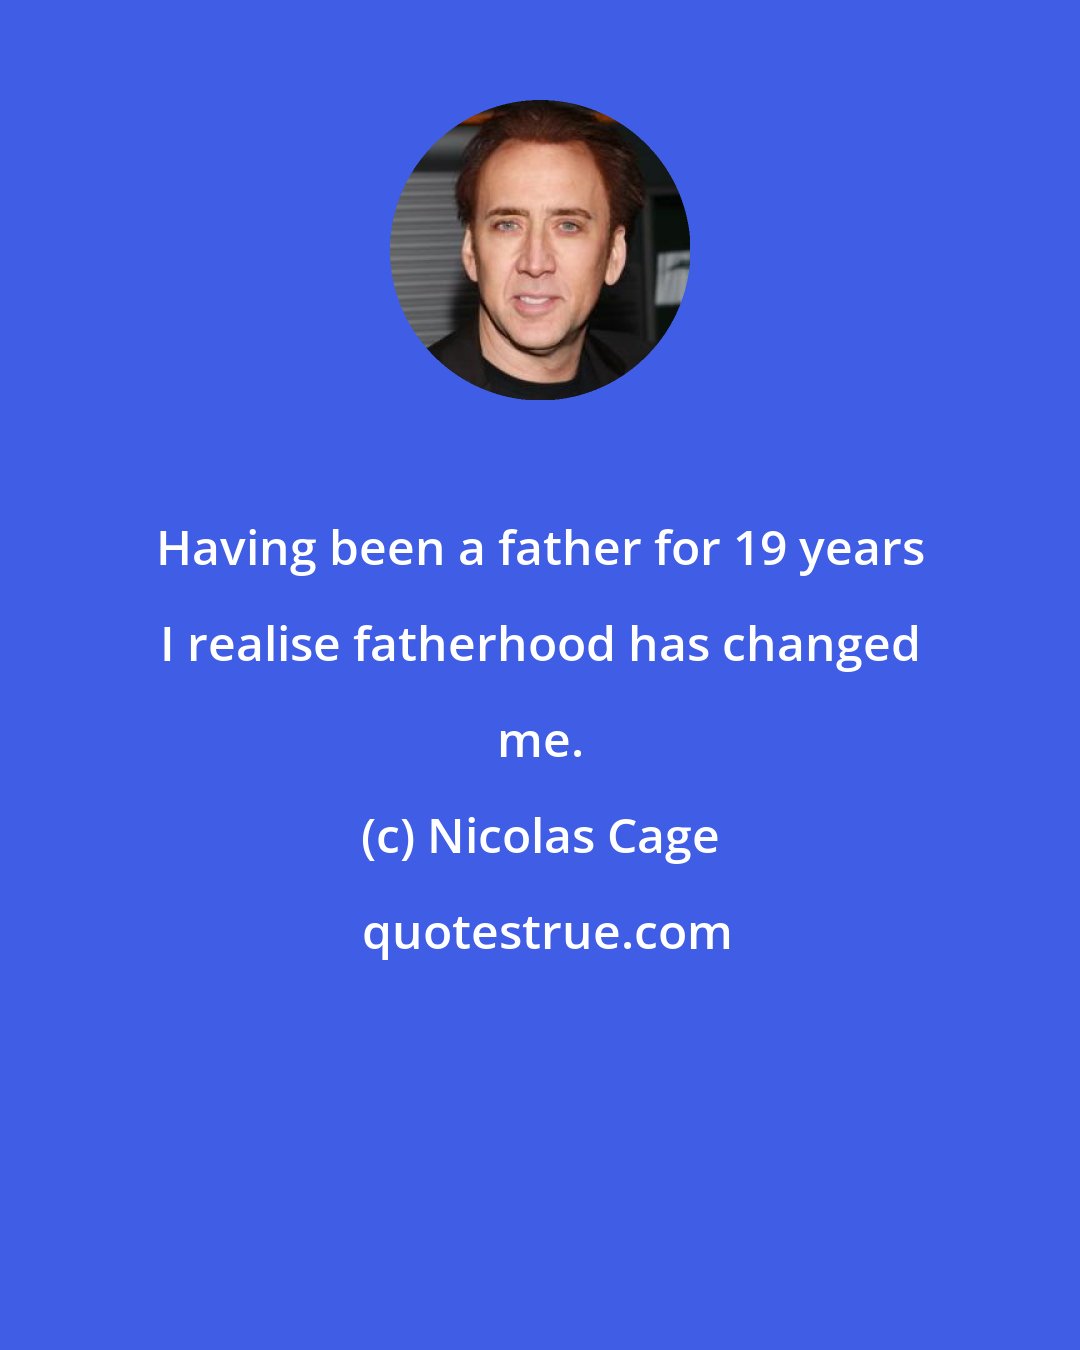 Nicolas Cage: Having been a father for 19 years I realise fatherhood has changed me.